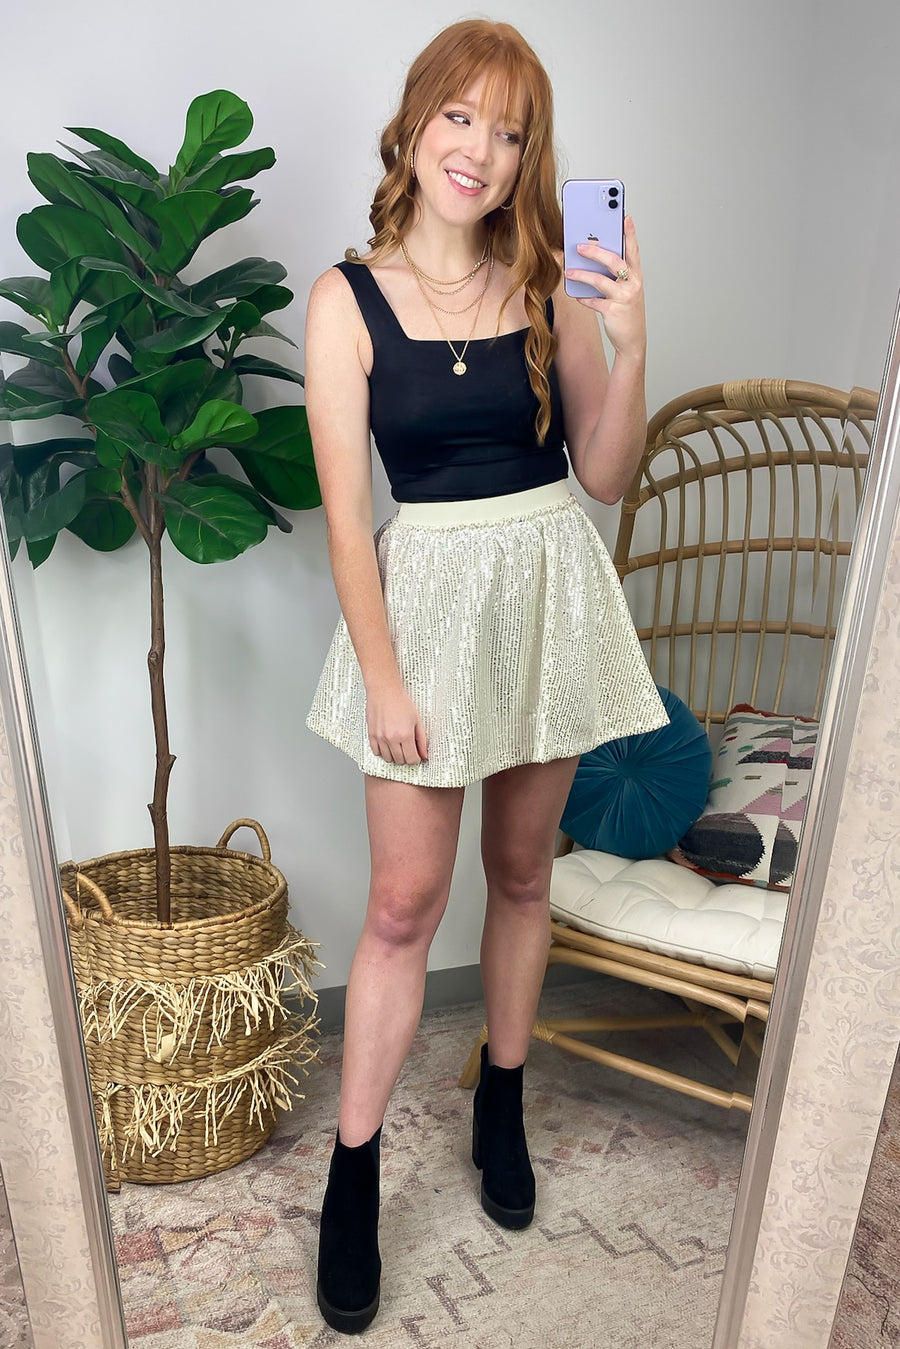  Light Up the Sky Sequin Skirt - FINAL SALE - Madison and Mallory